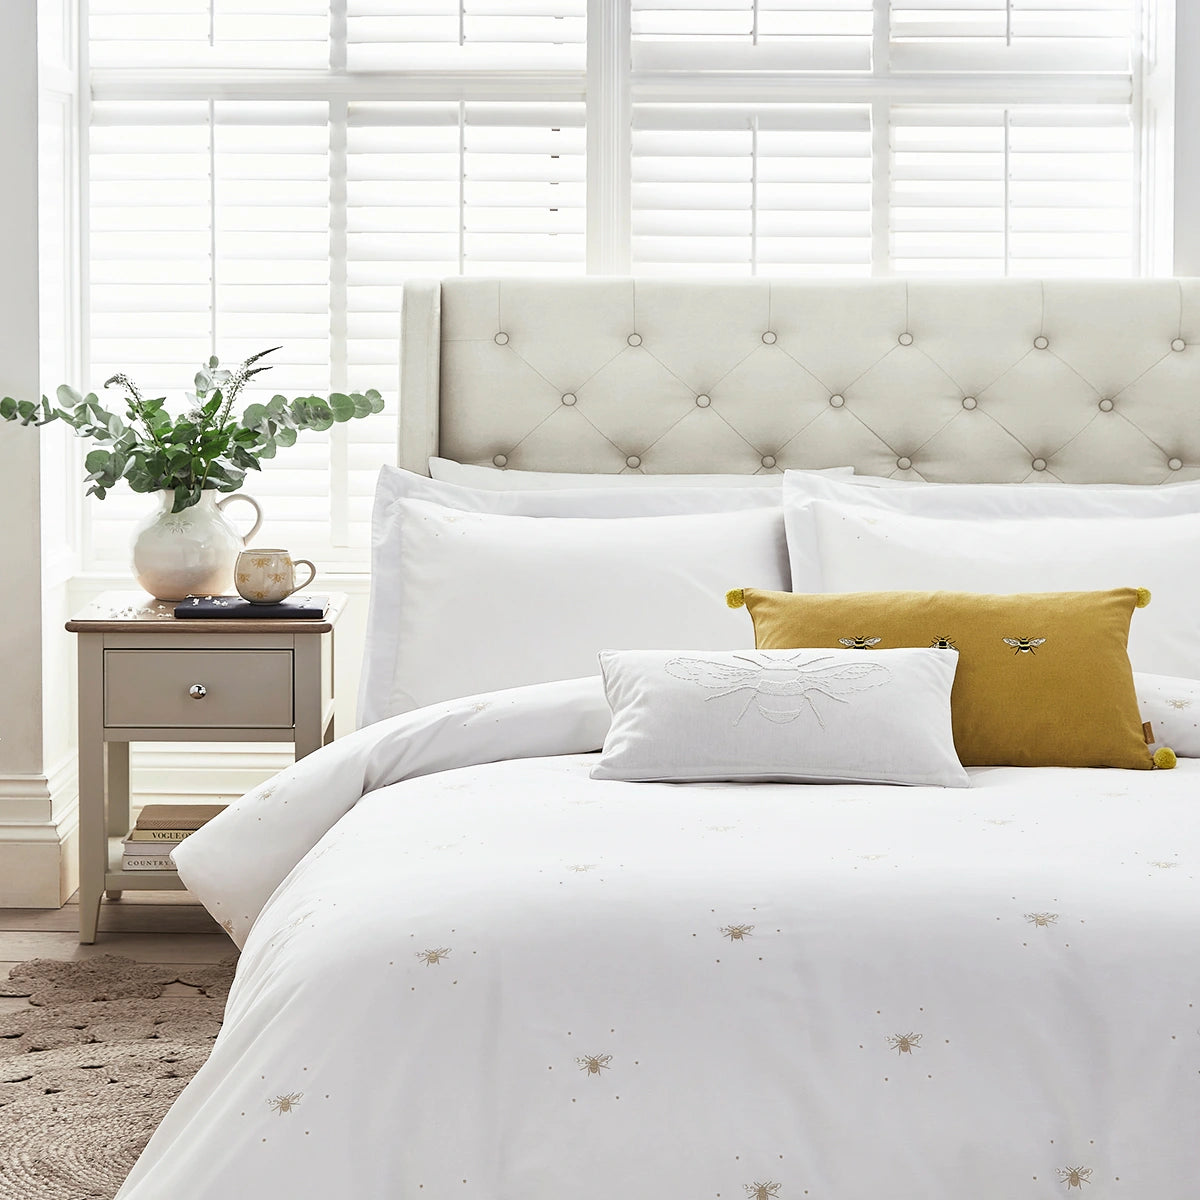 How to Choose the Correct Bed Sheet Size